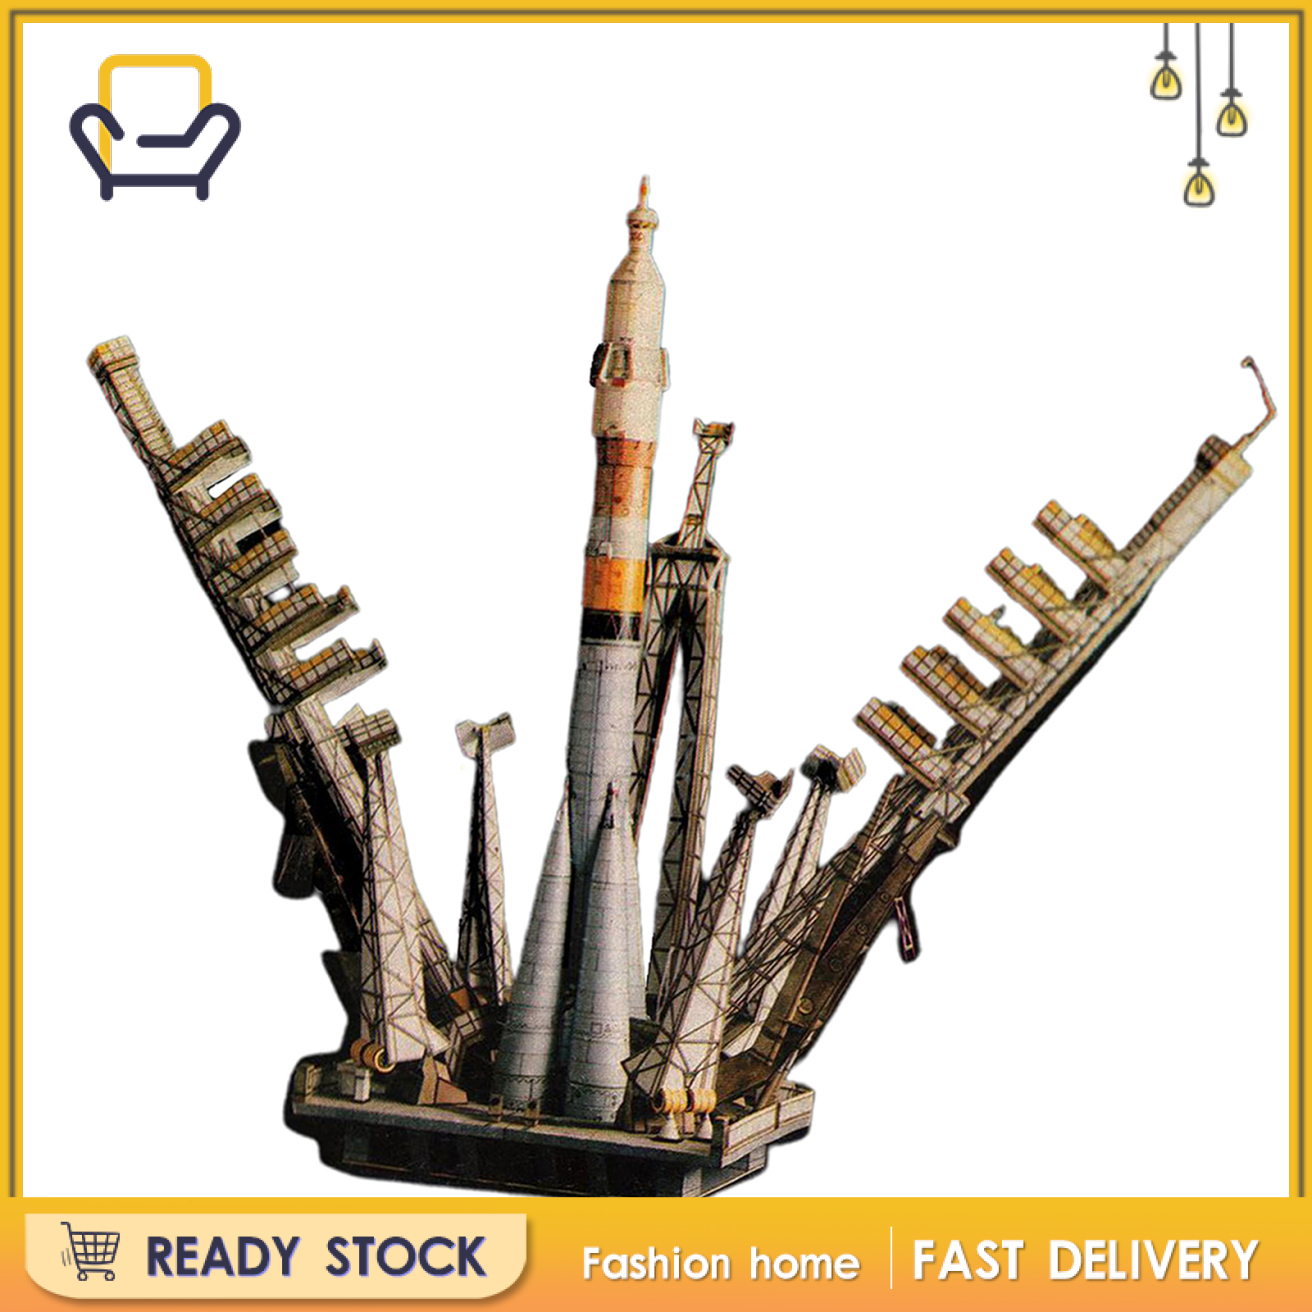 【Fashion home】1:80 Scale Russian Soyuz Carrier Rocket and Launch Pad to Build 3D Model Kit